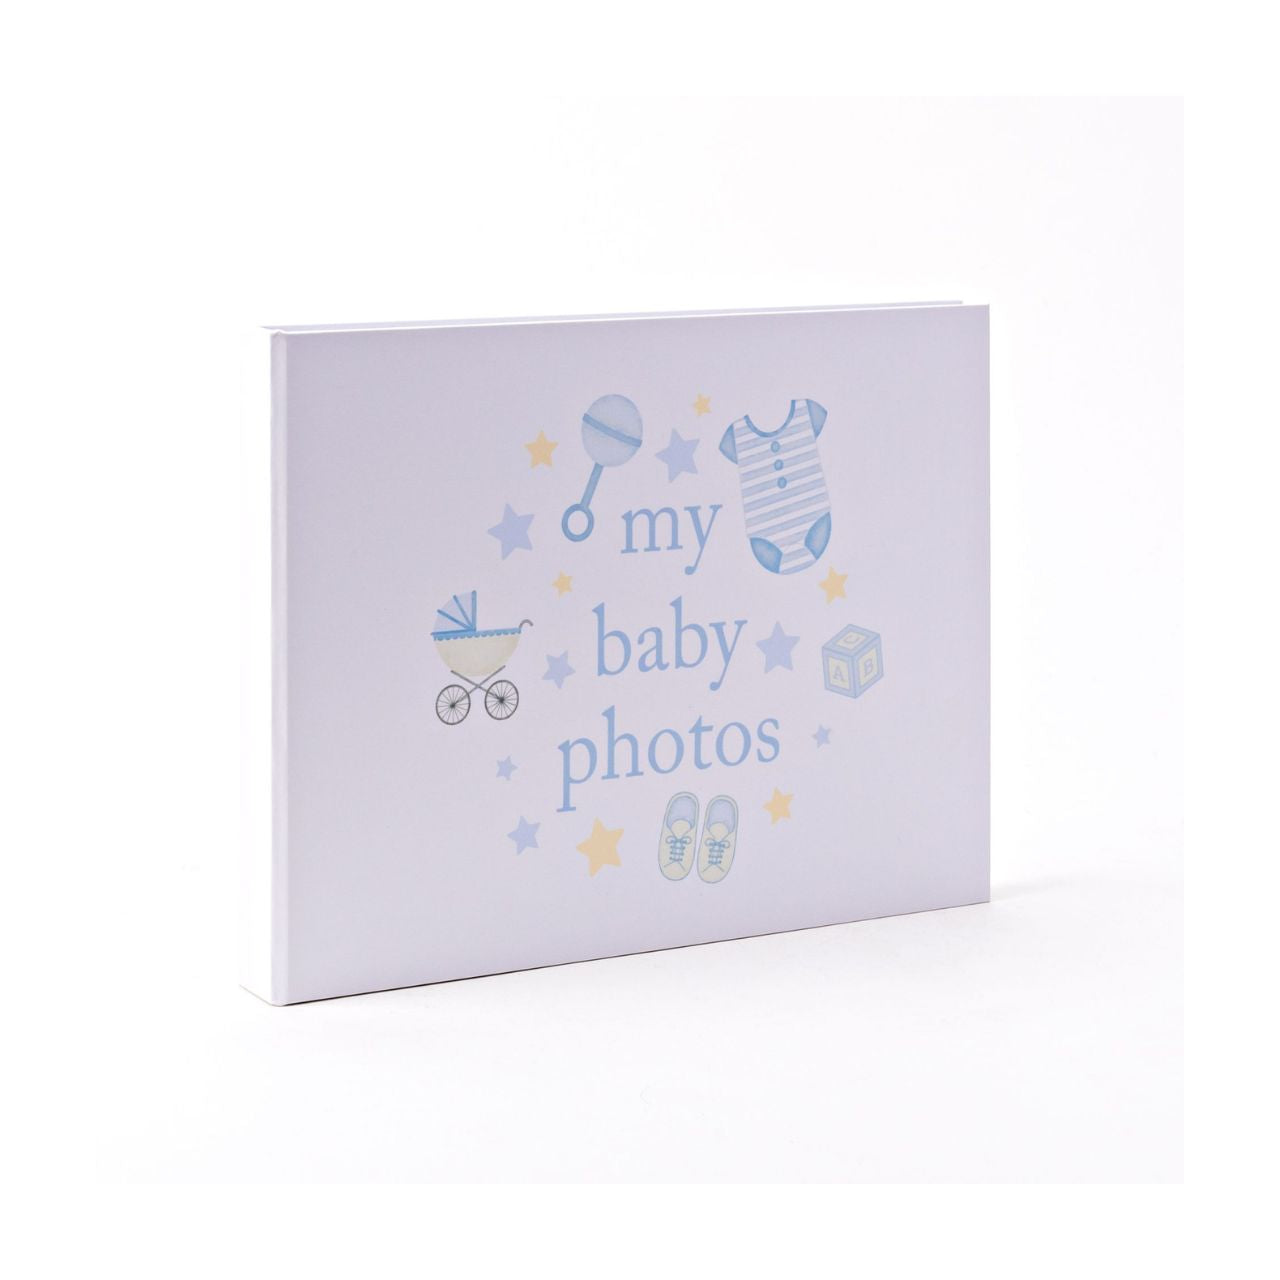 Keep an adorable record of those early days, weeks and months with this baby photo album. From the Hello Baby collection by CELEBRATIONS - gifts to celebrate a perfect new arrival.